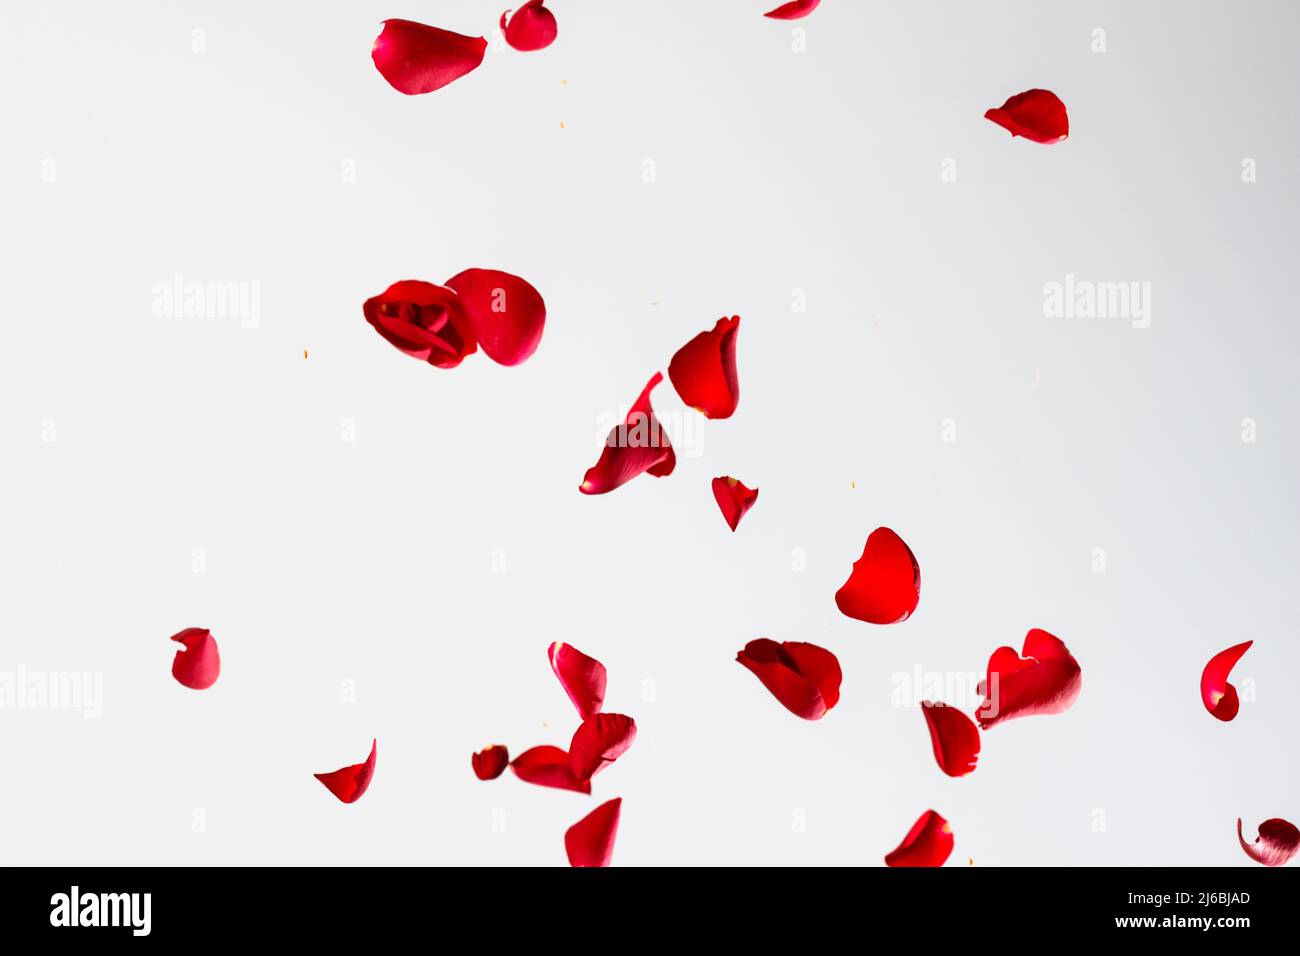 Red Rose Petals Falling in Front of White Background Stock Photo